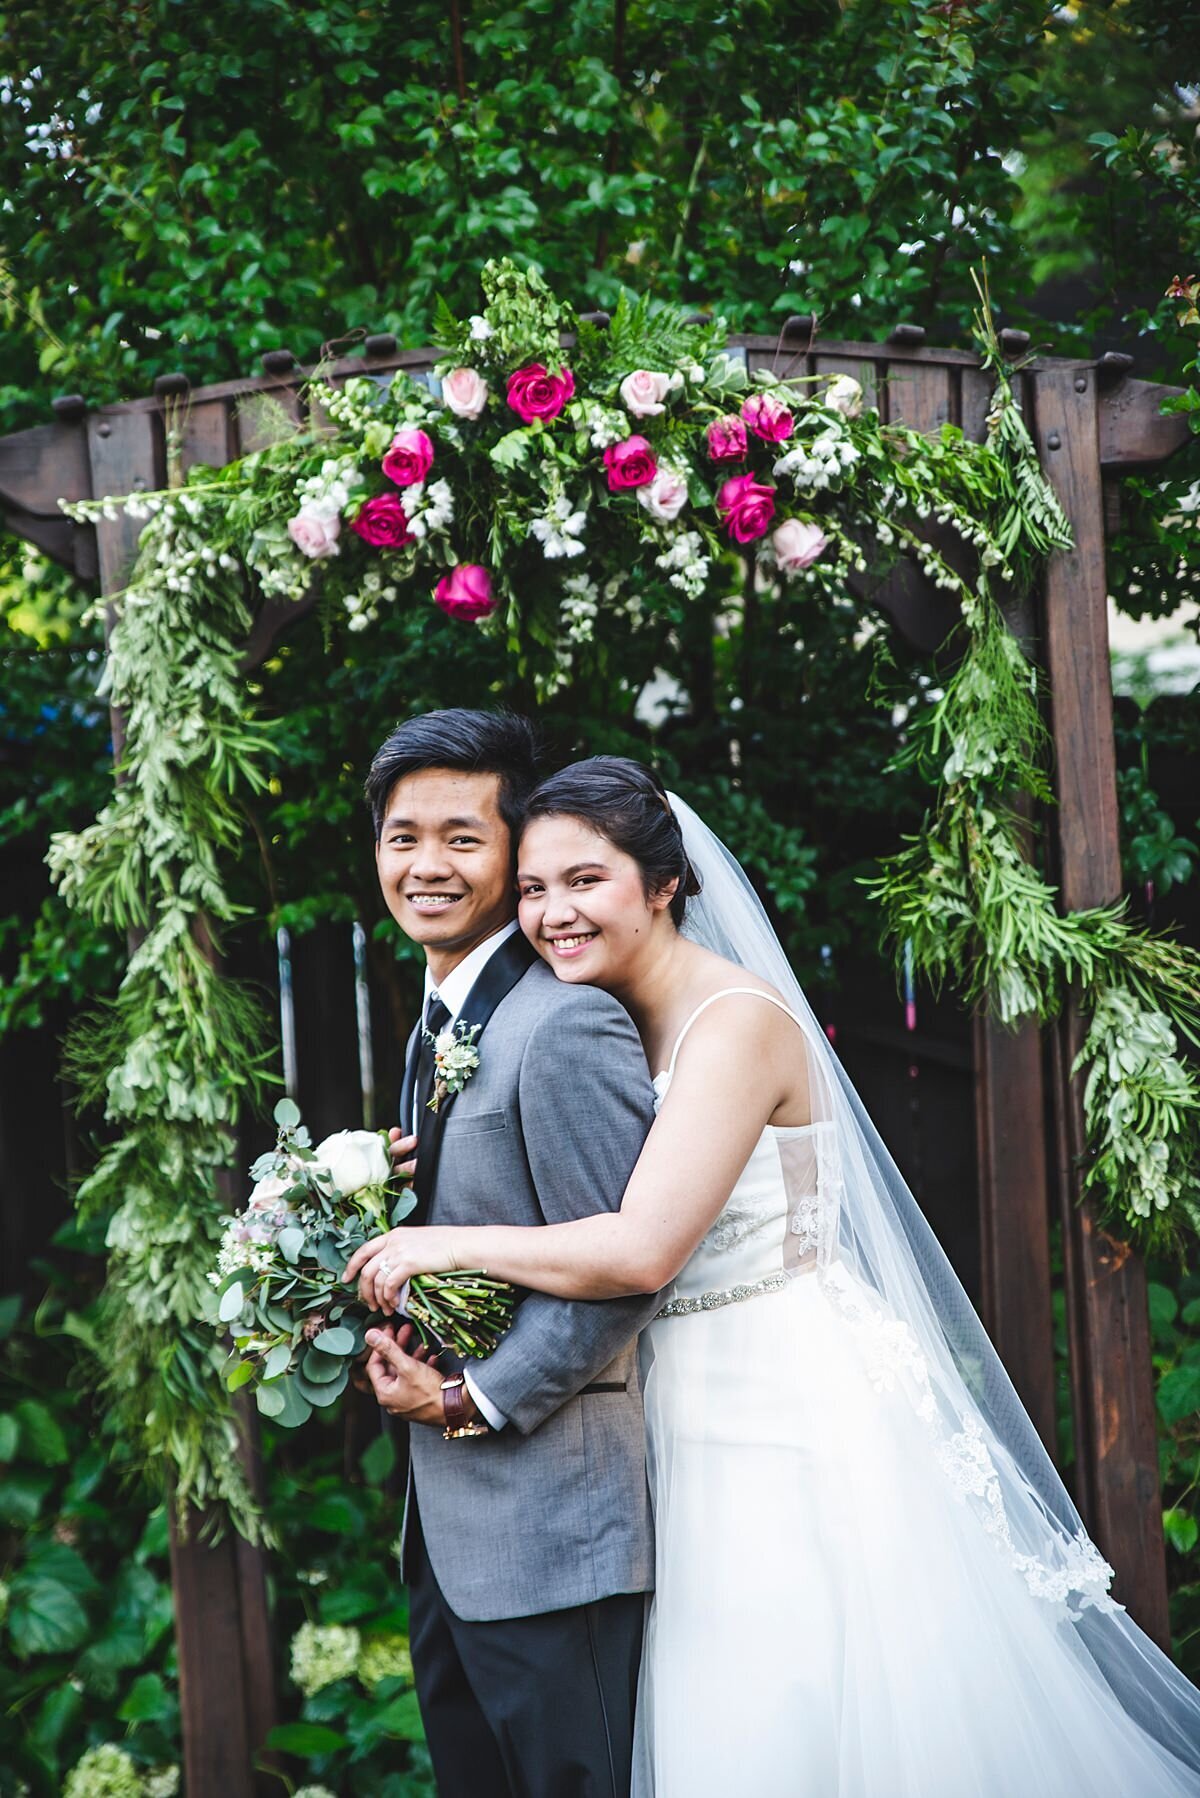 The bride, wearing a flowing wedding dress and long veil embraces the groom who is wearing a tuxedo with a grey jacket and white boutonniere. The bride is holding a large bouquet of white roses, white peonies, white carnations, white tea roses and silver dollar eucalyptus. They are standing in front of a wooden arbor decorated with a garland of evergreen, white roses and pink roses.